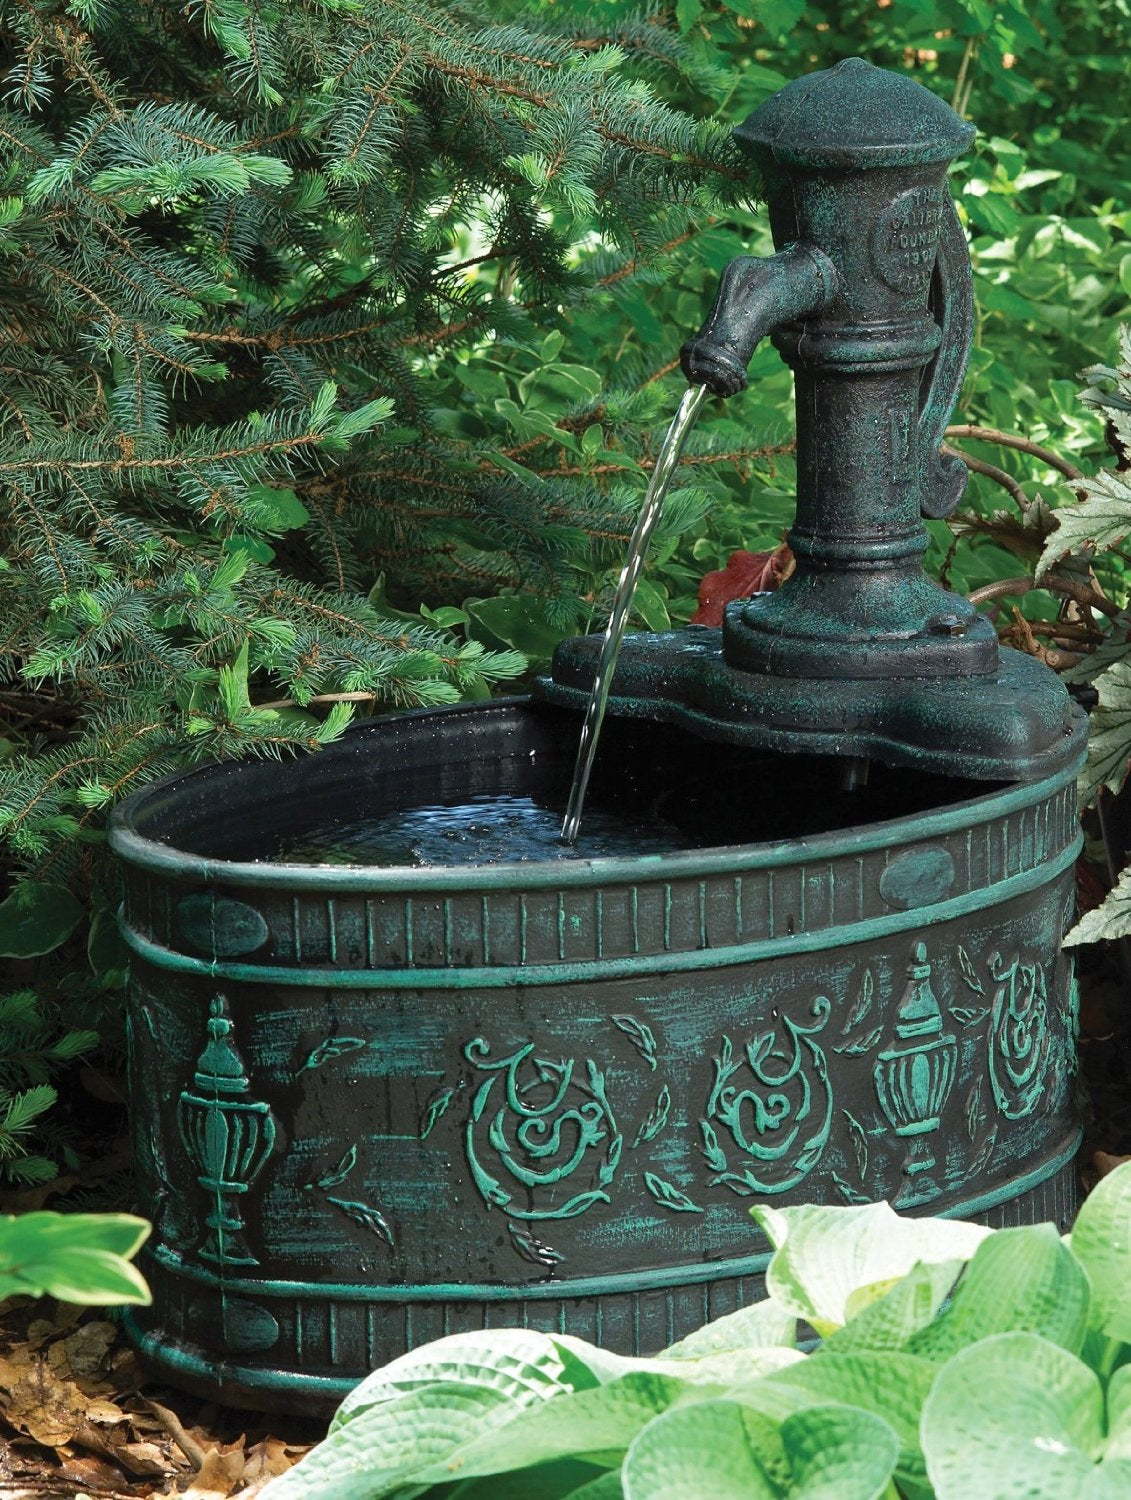 buy fountains at cheap rate in bulk. wholesale & retail outdoor & lawn decor store.